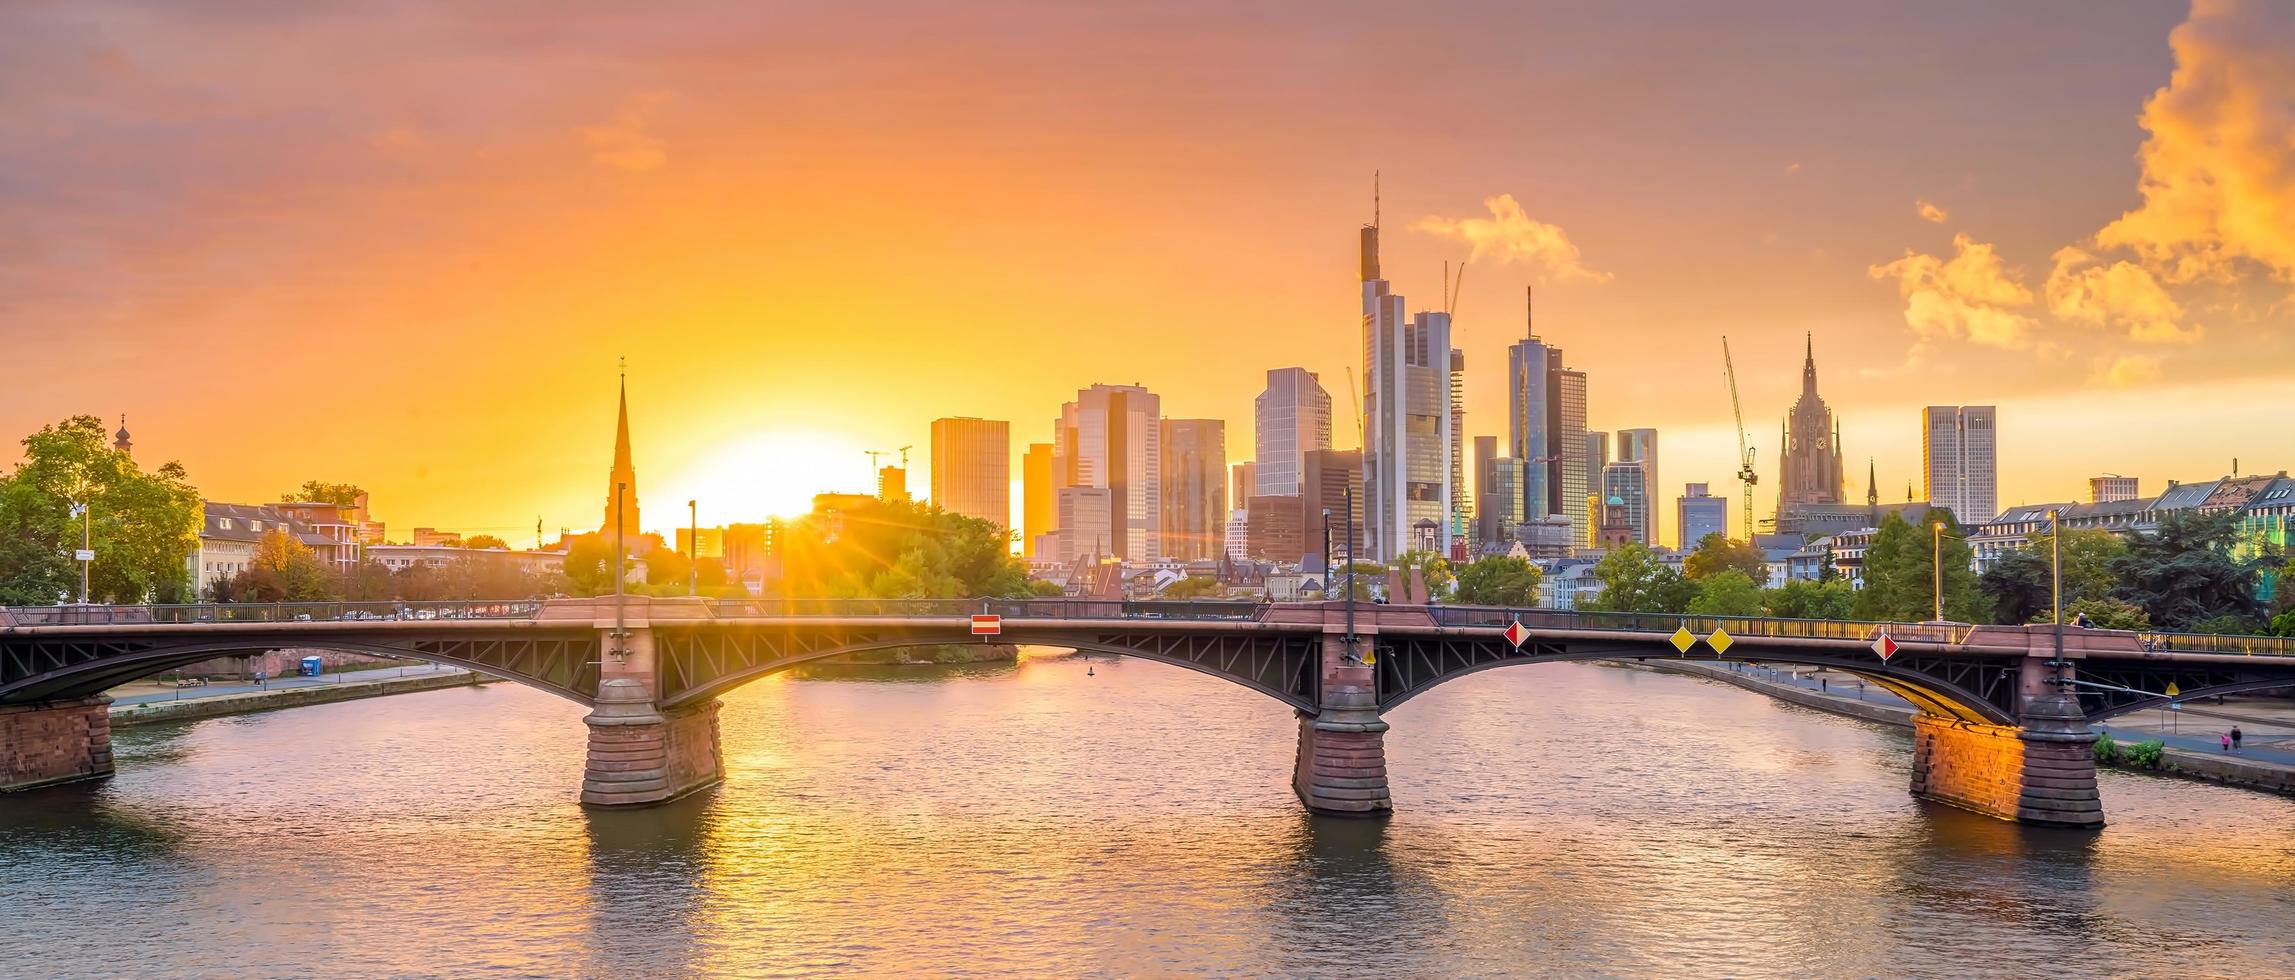 View of Frankfurt city skyline in Germany at sunset photo